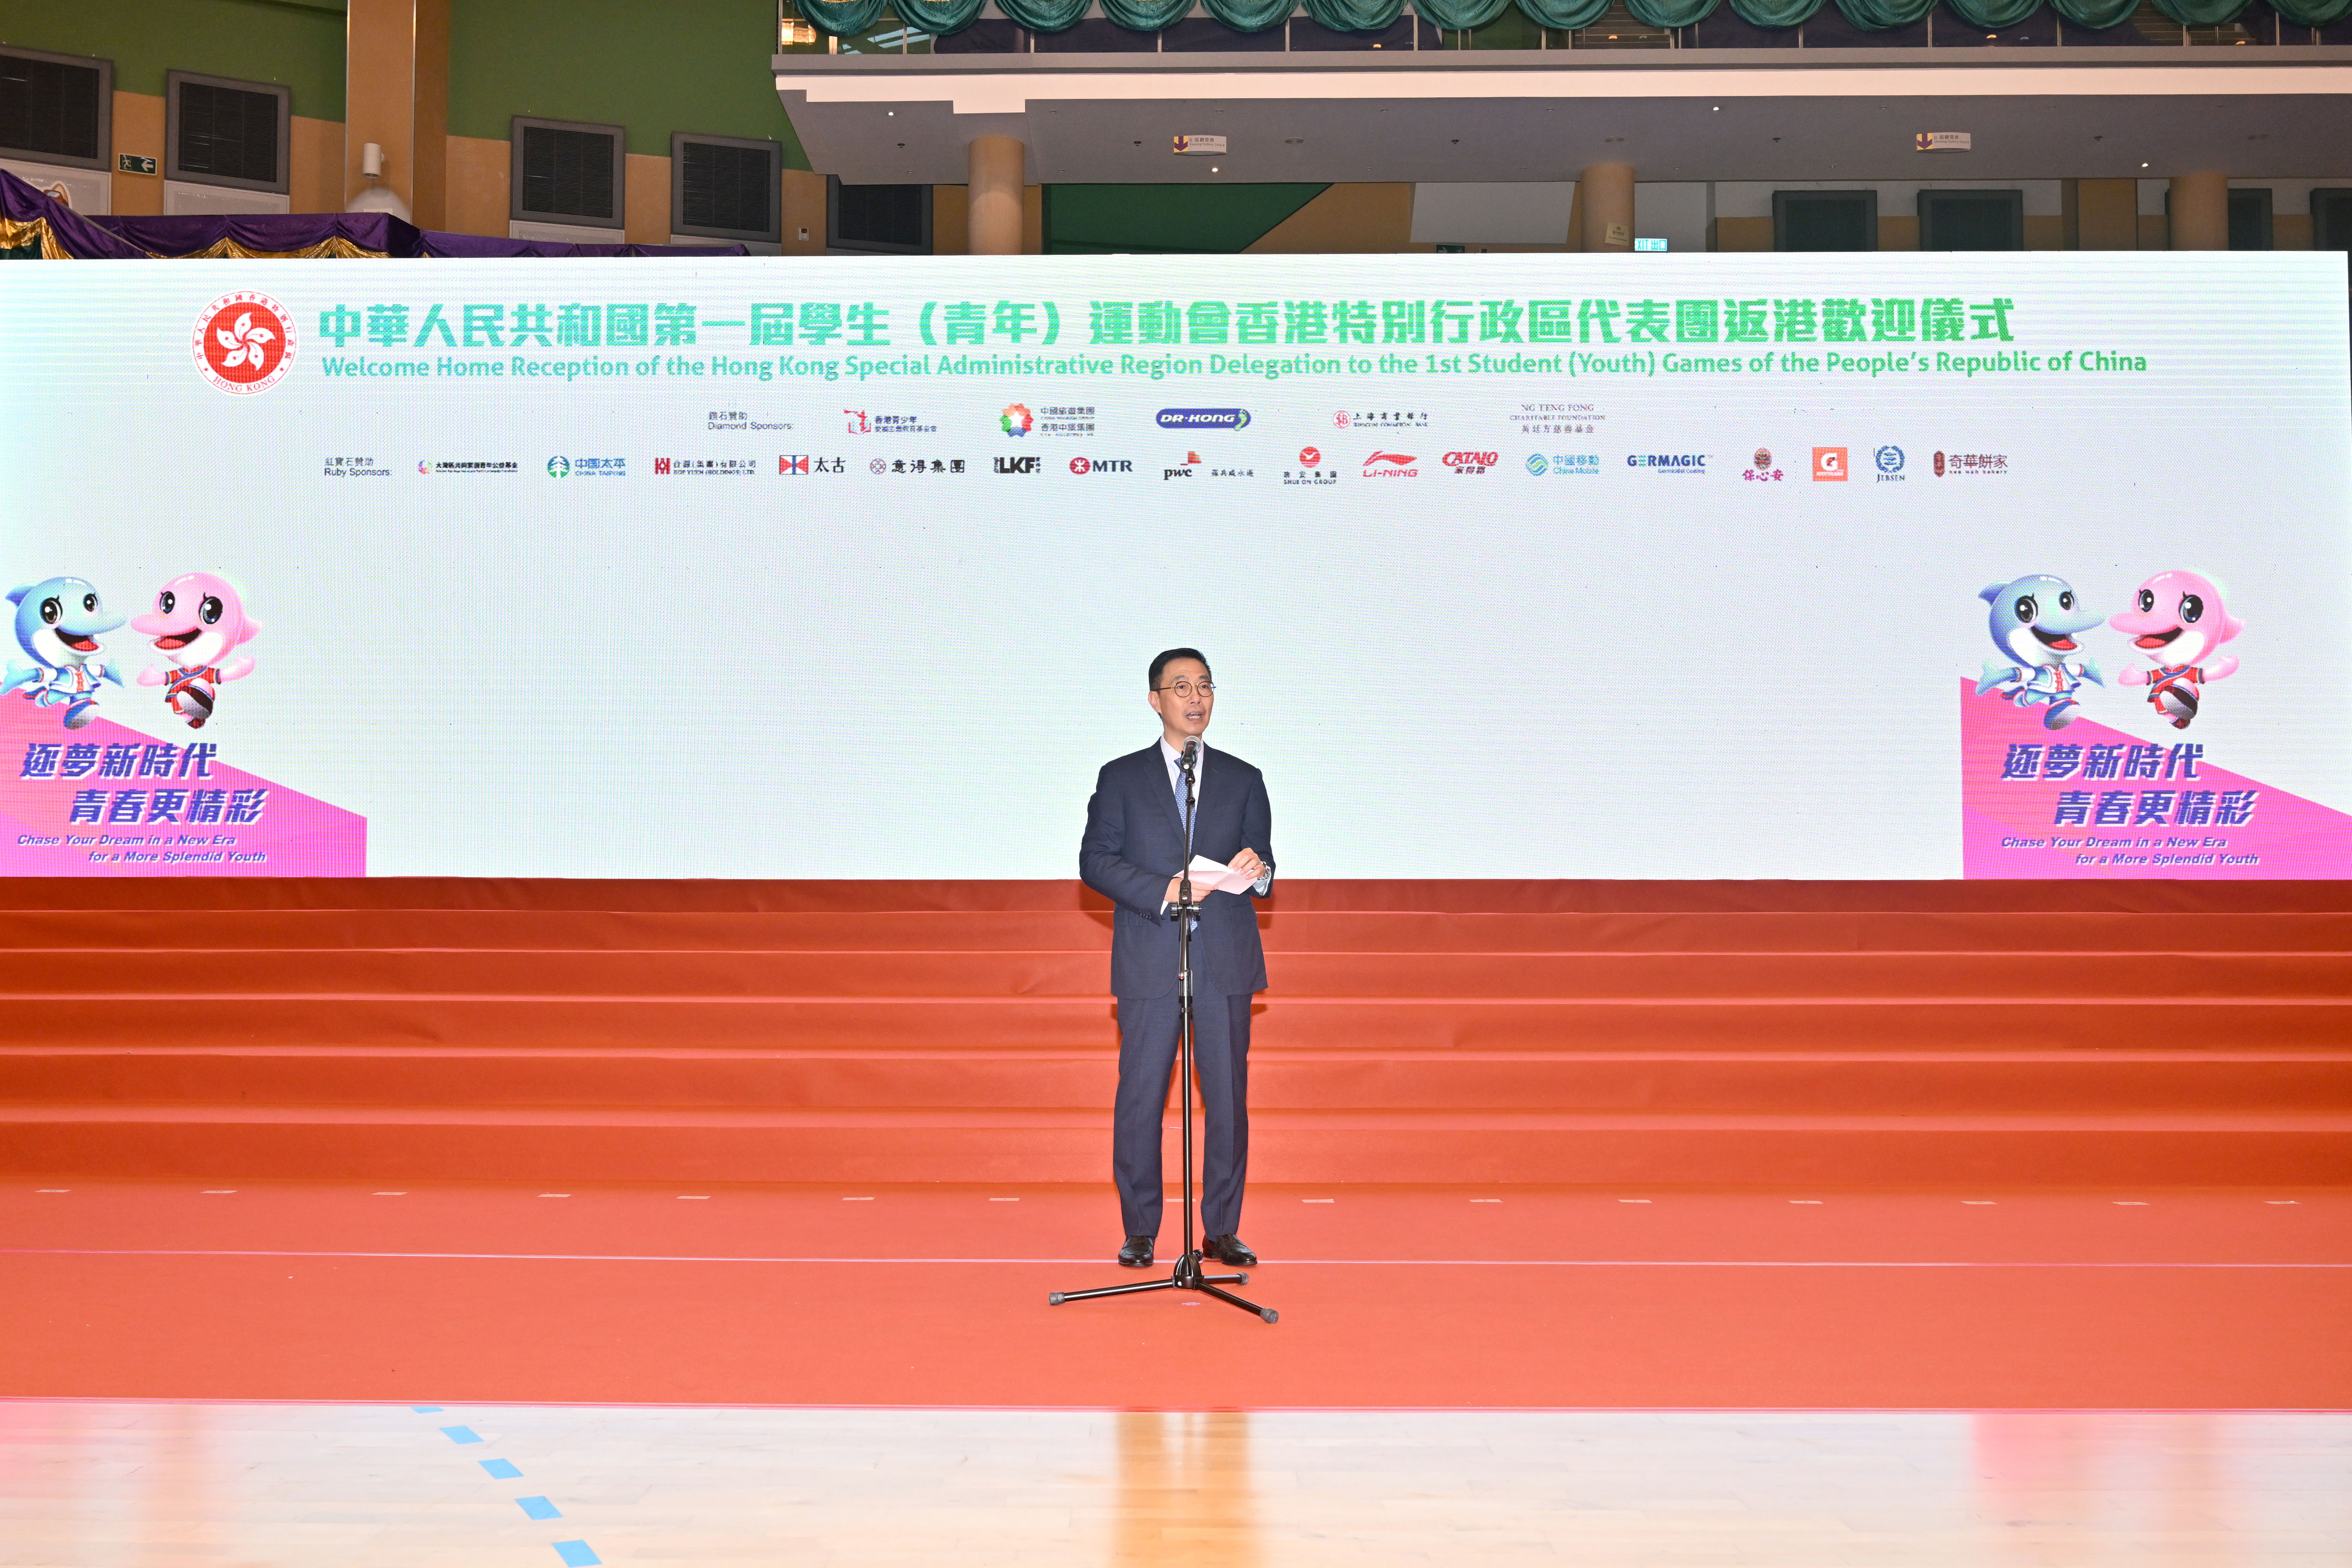 The Secretary for Culture, Sports and Tourism, Mr Kevin Yeung, officiated at the Welcome Home Ceremony of the HKSAR Delegation to the 1st NSYG